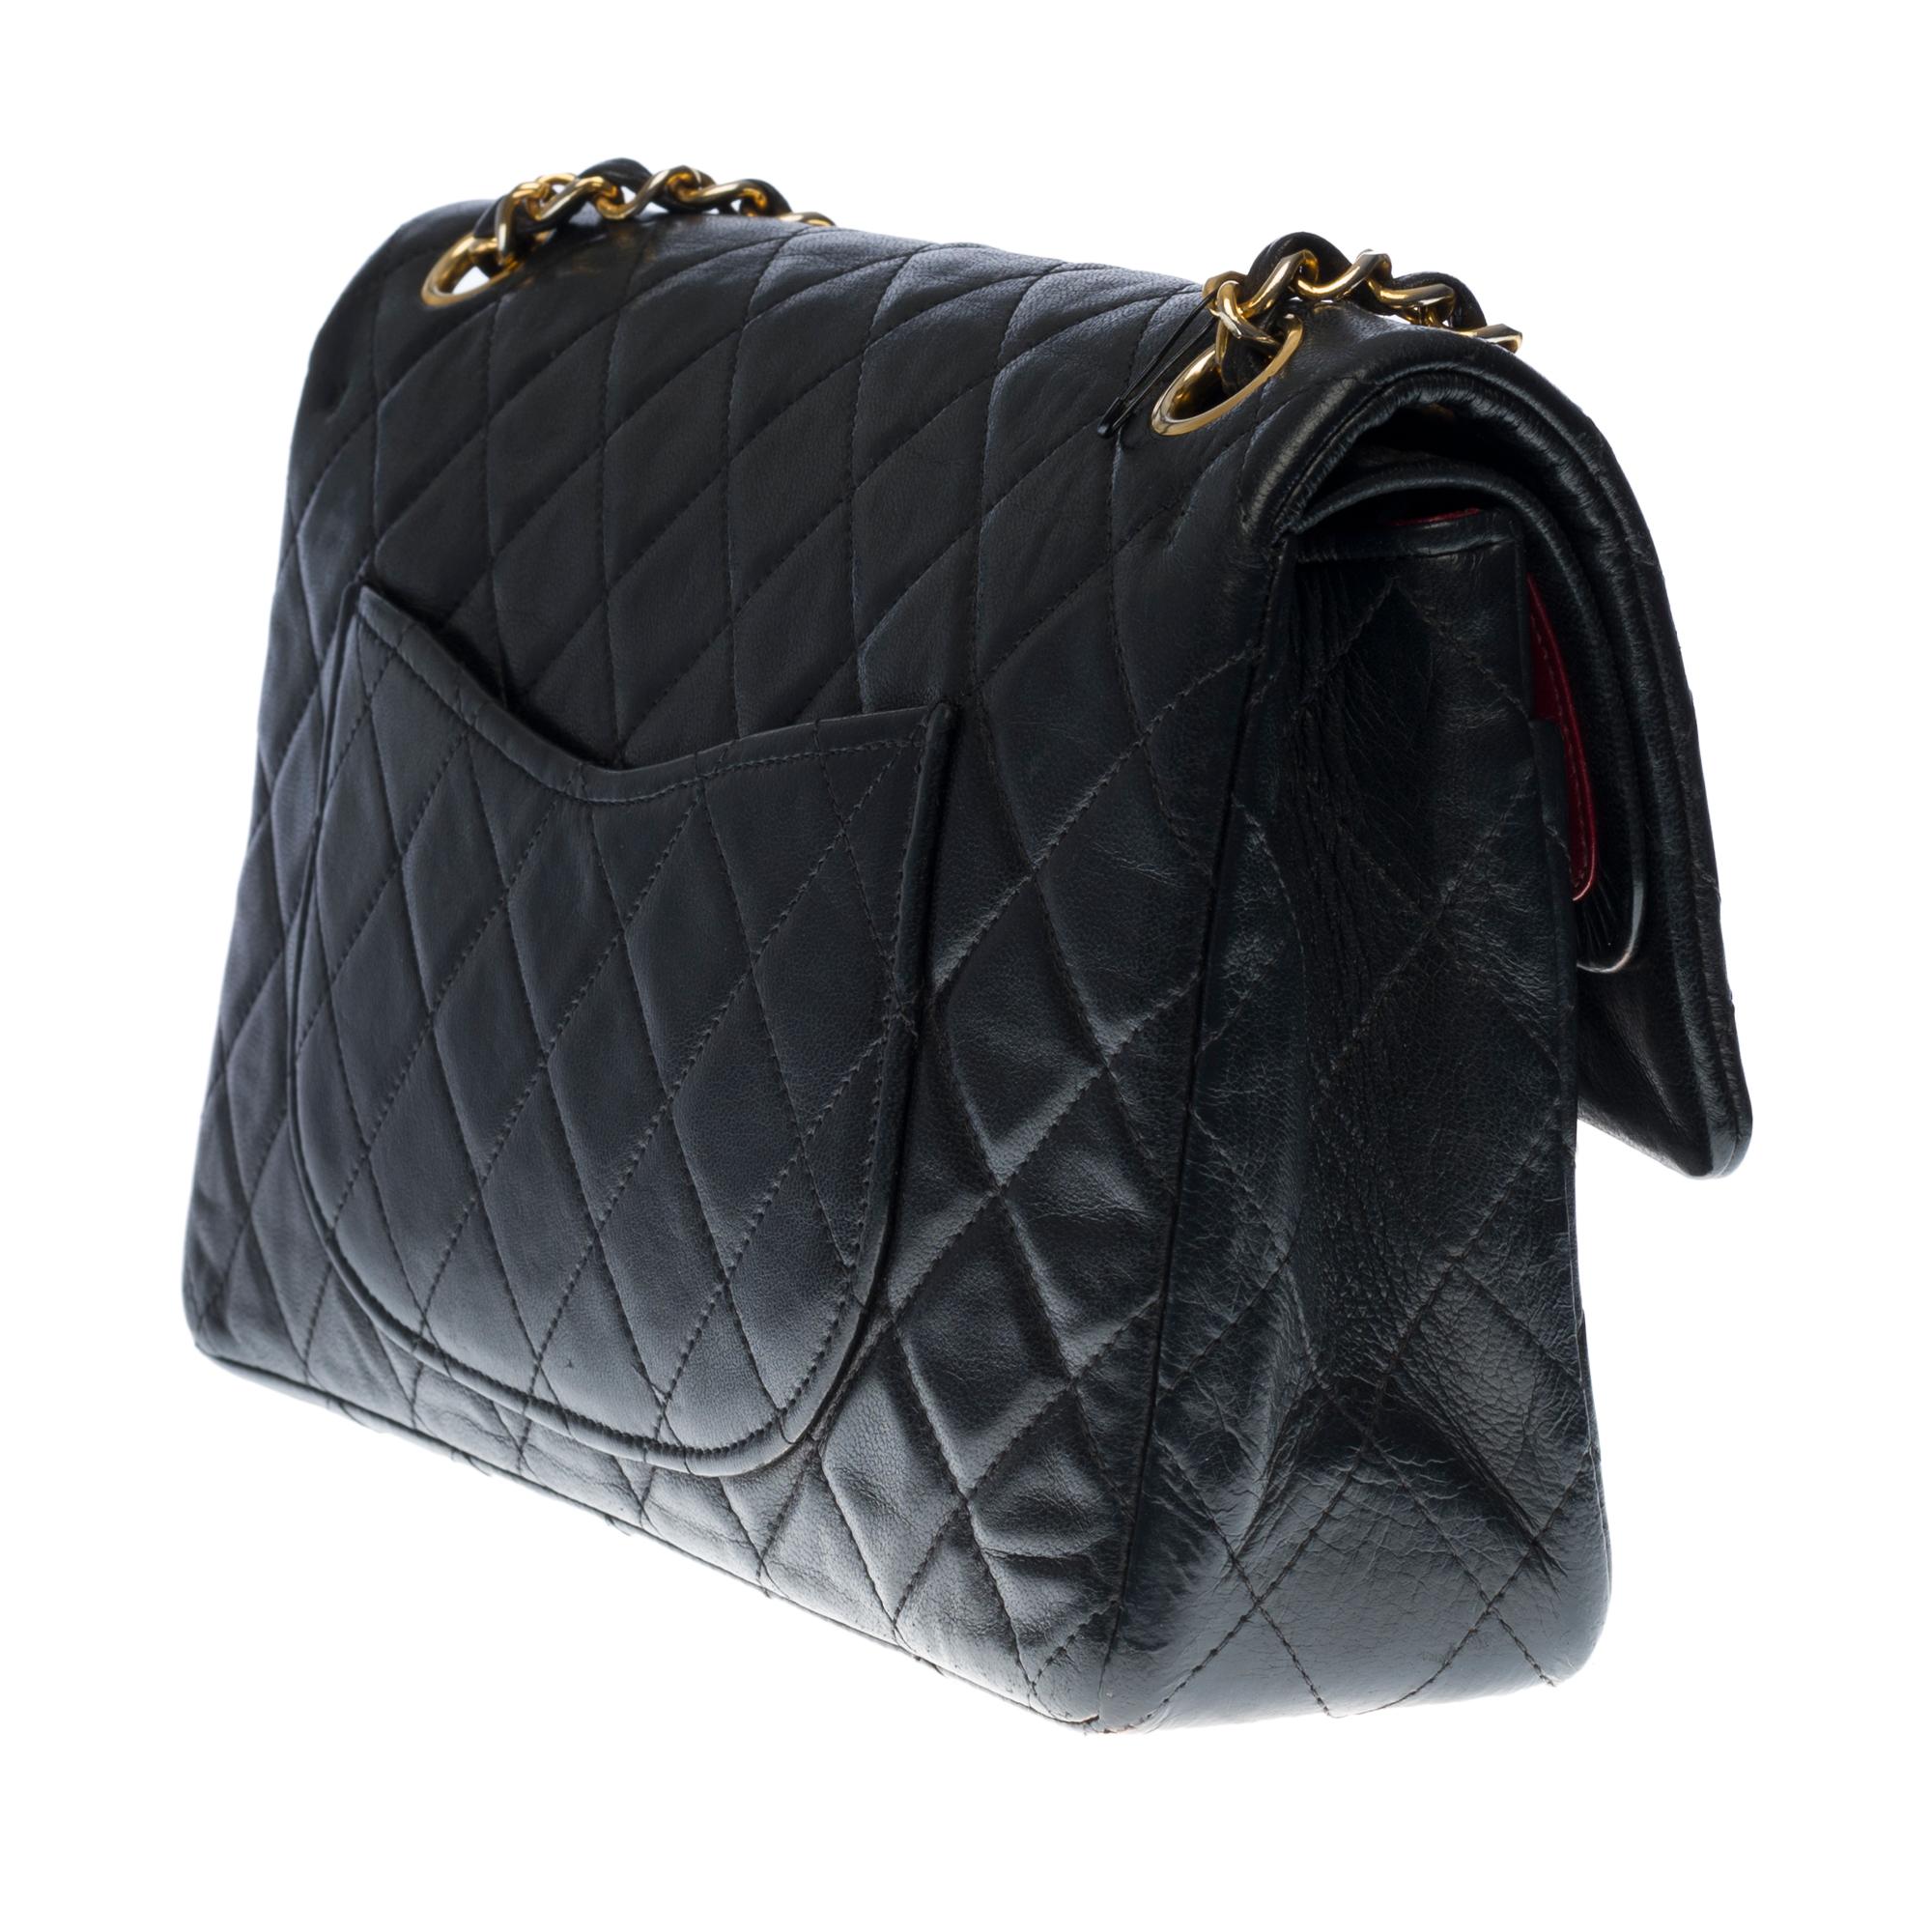 Women's Chanel Timeless Medium Double Flap Shoulder bag in black quilted lambskin, GHW